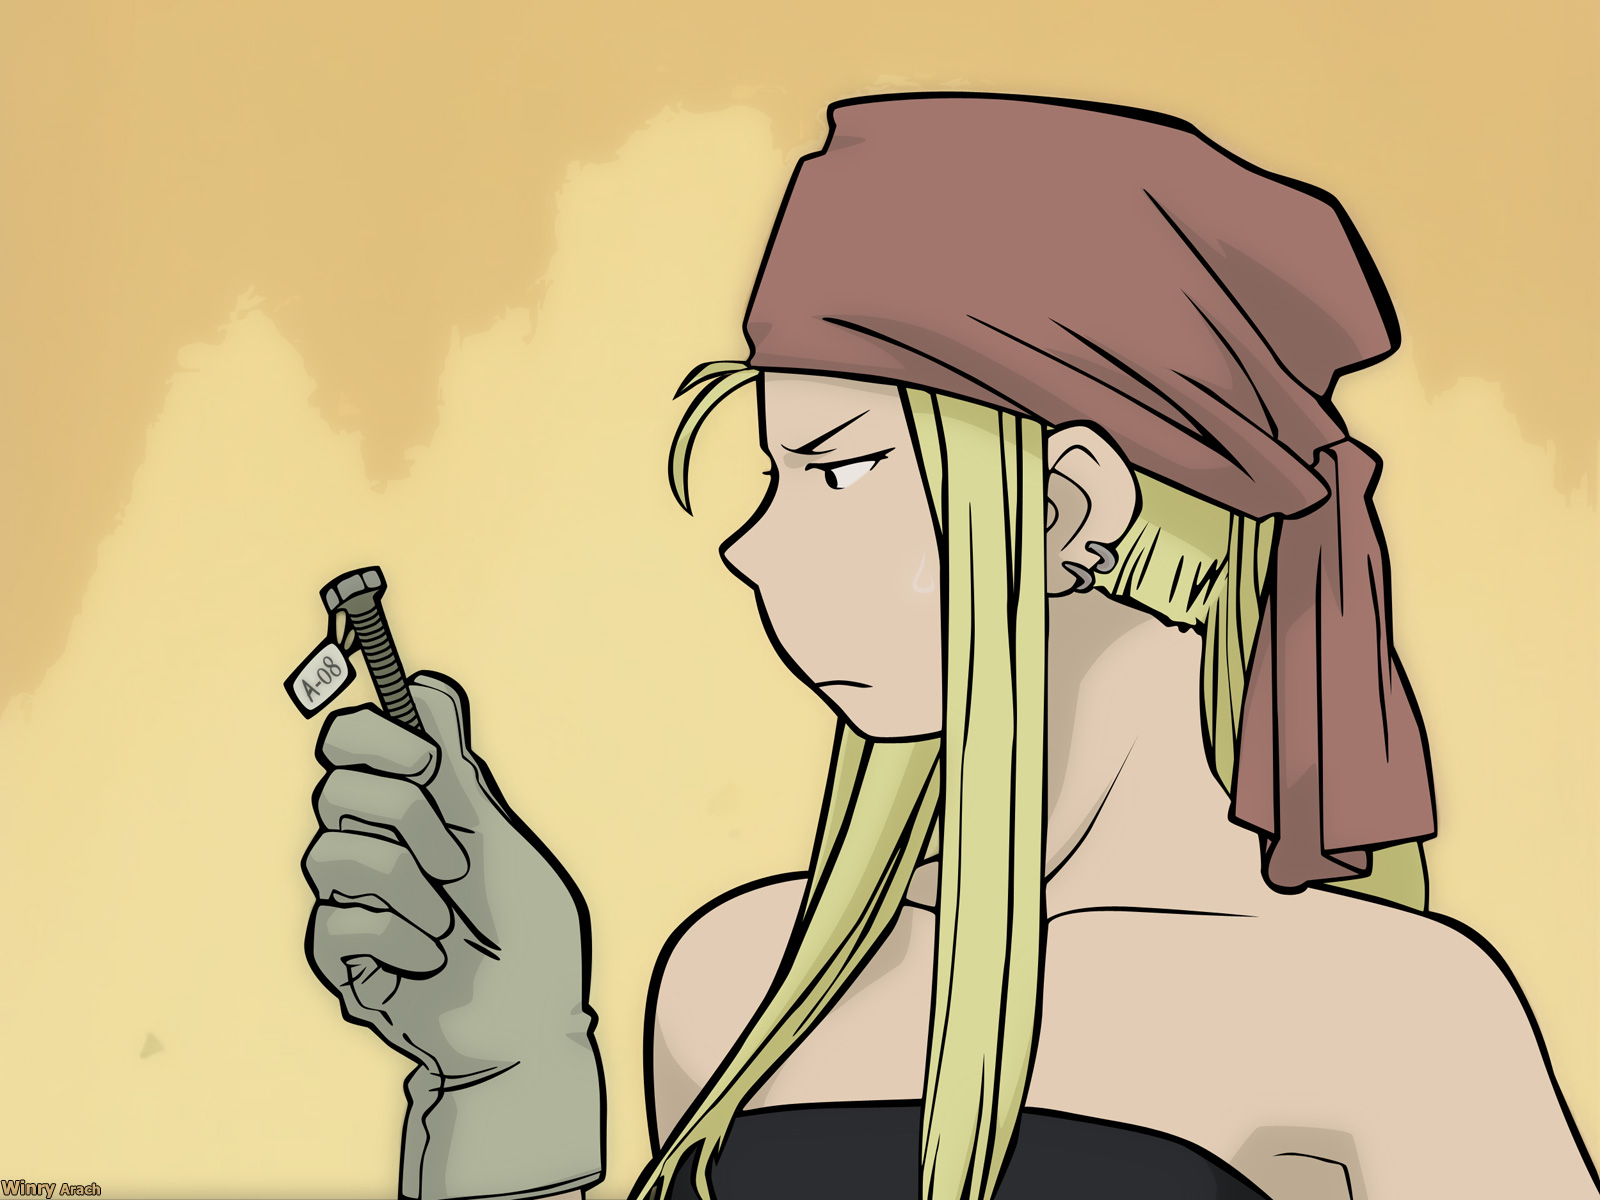 Winry Rockbell - HD wallpaper featuring character from an anime/manga series.